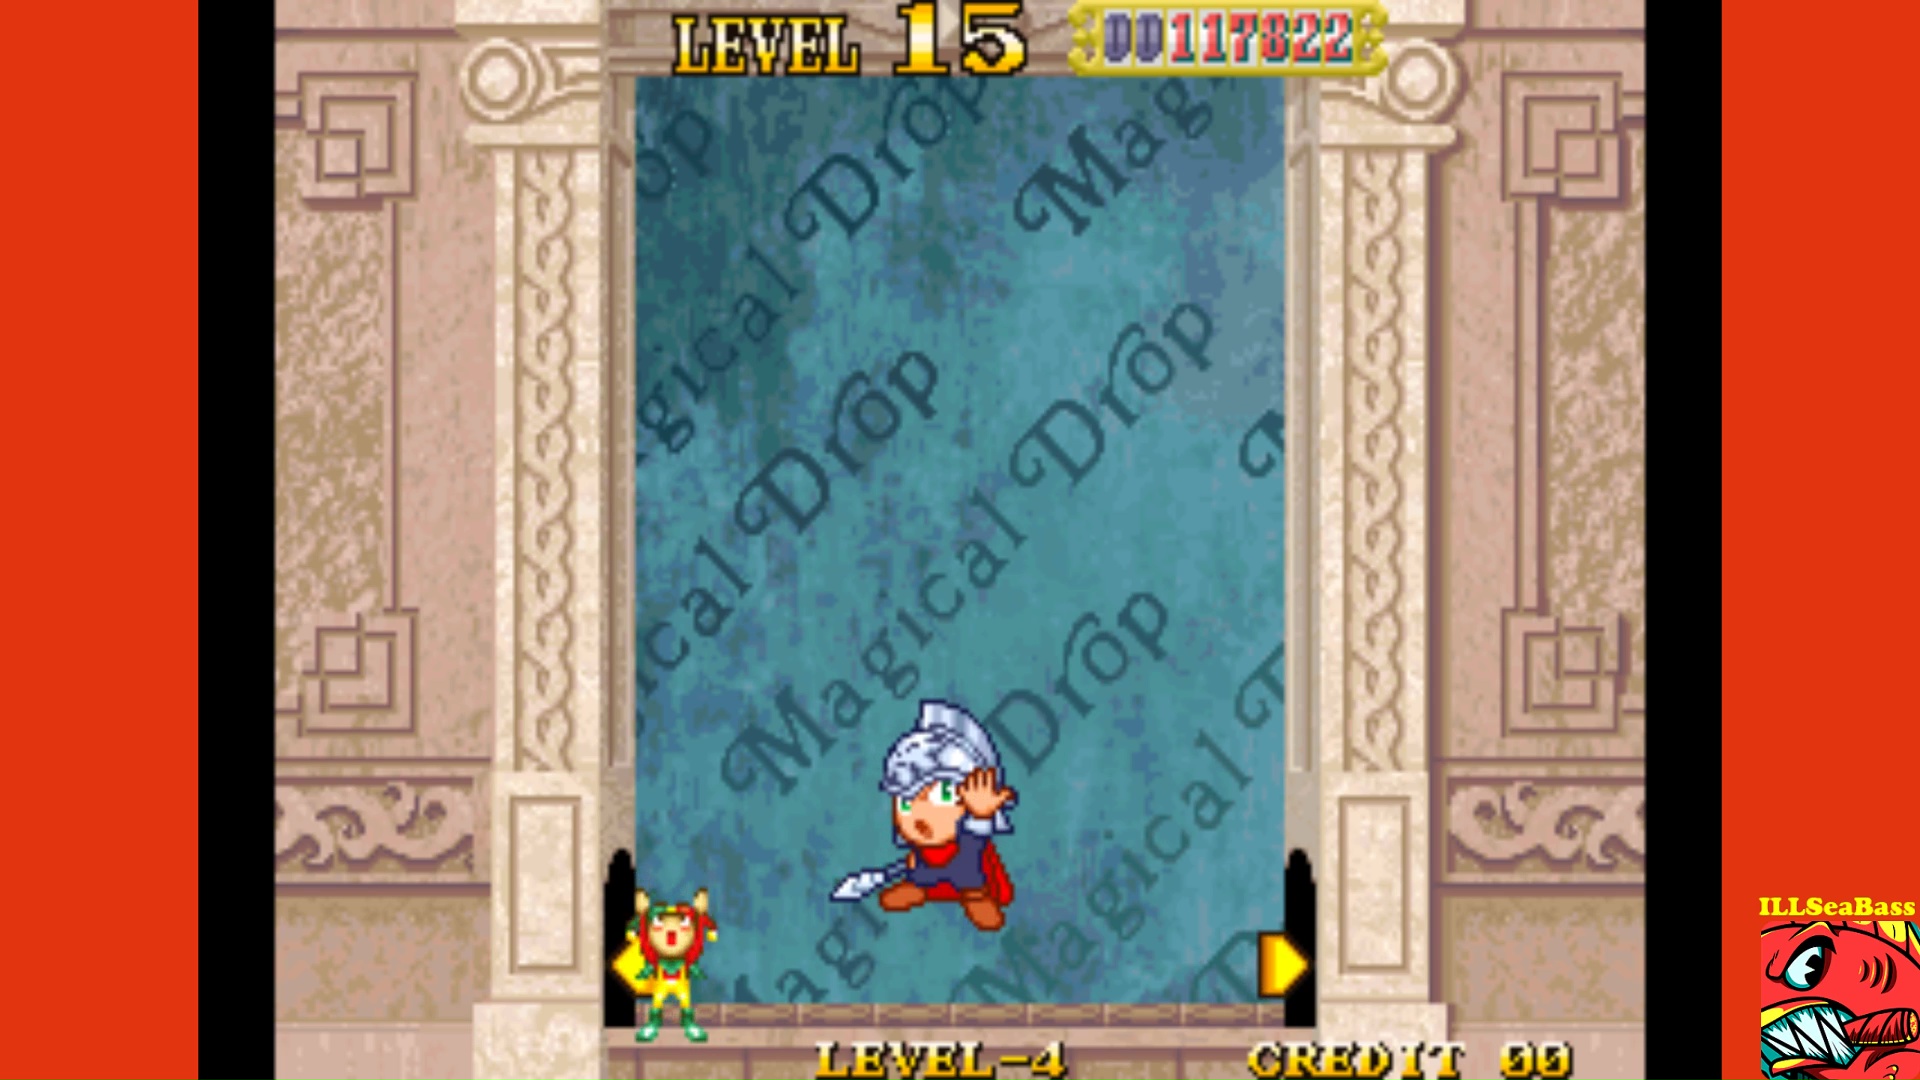 ILLSeaBass: Magical Drop 3 [Survival Mode/Easy] (Neo Geo Emulated) 117,822 points on 2017-09-26 14:35:42